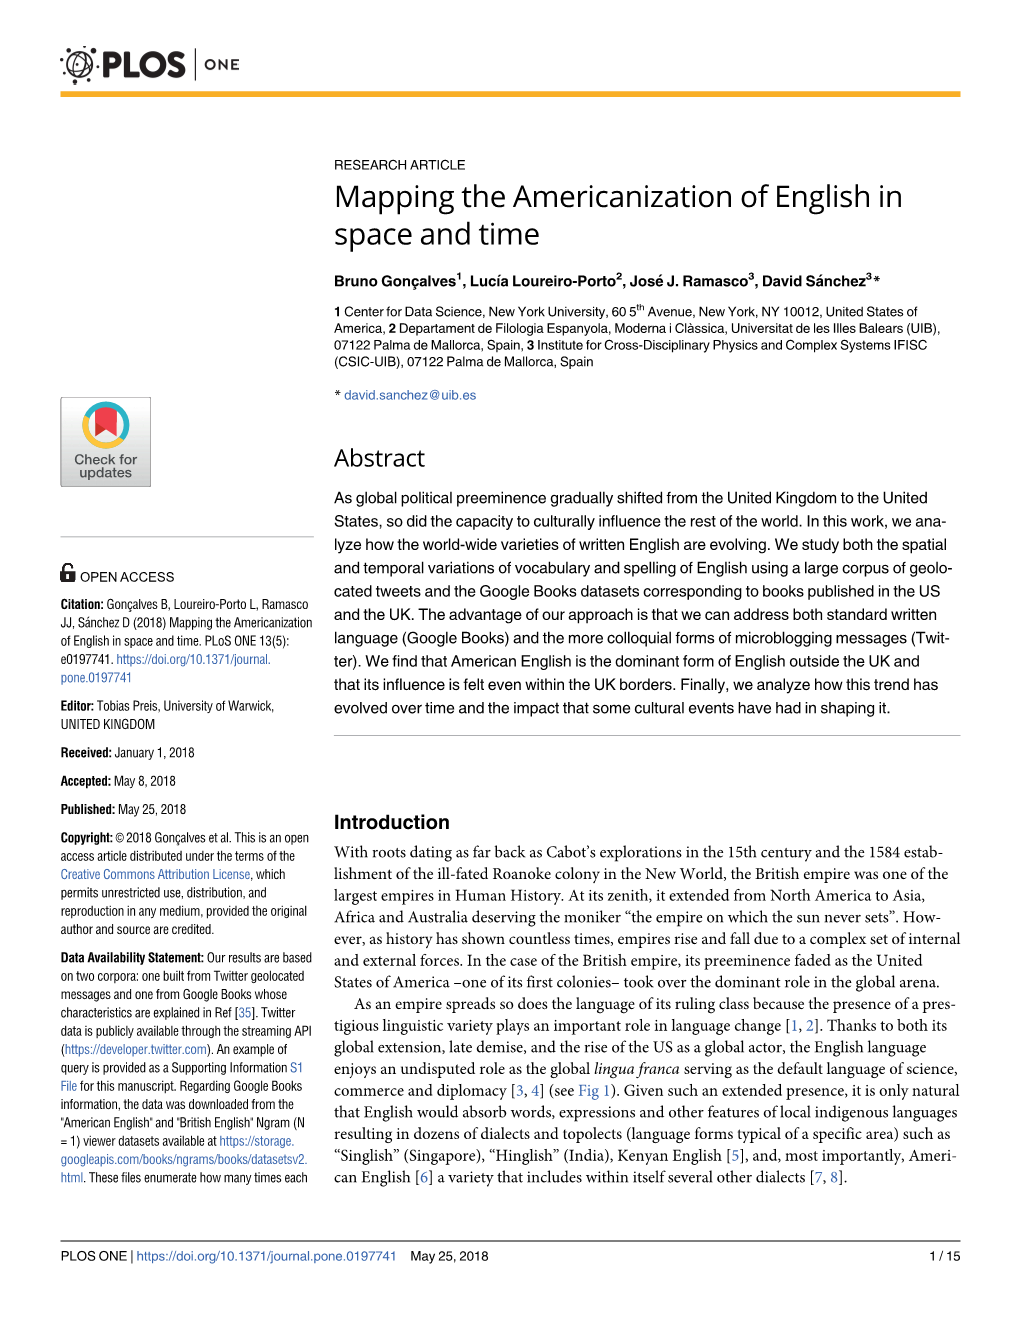 Mapping the Americanization of English in Space and Time